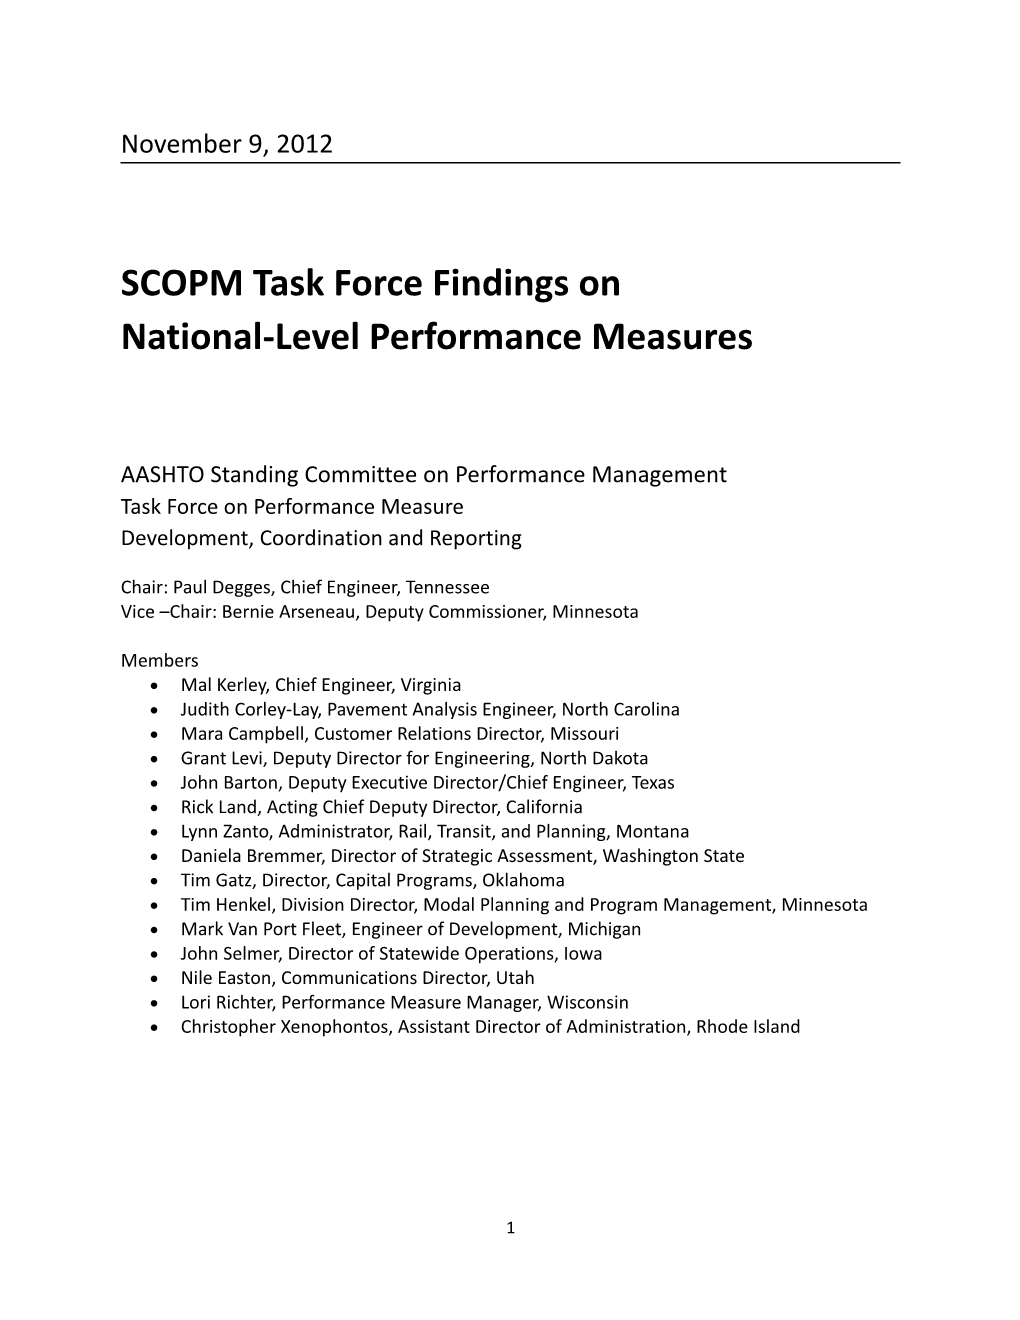 SCOPM Task Force Findings on National-Level Performance Measures